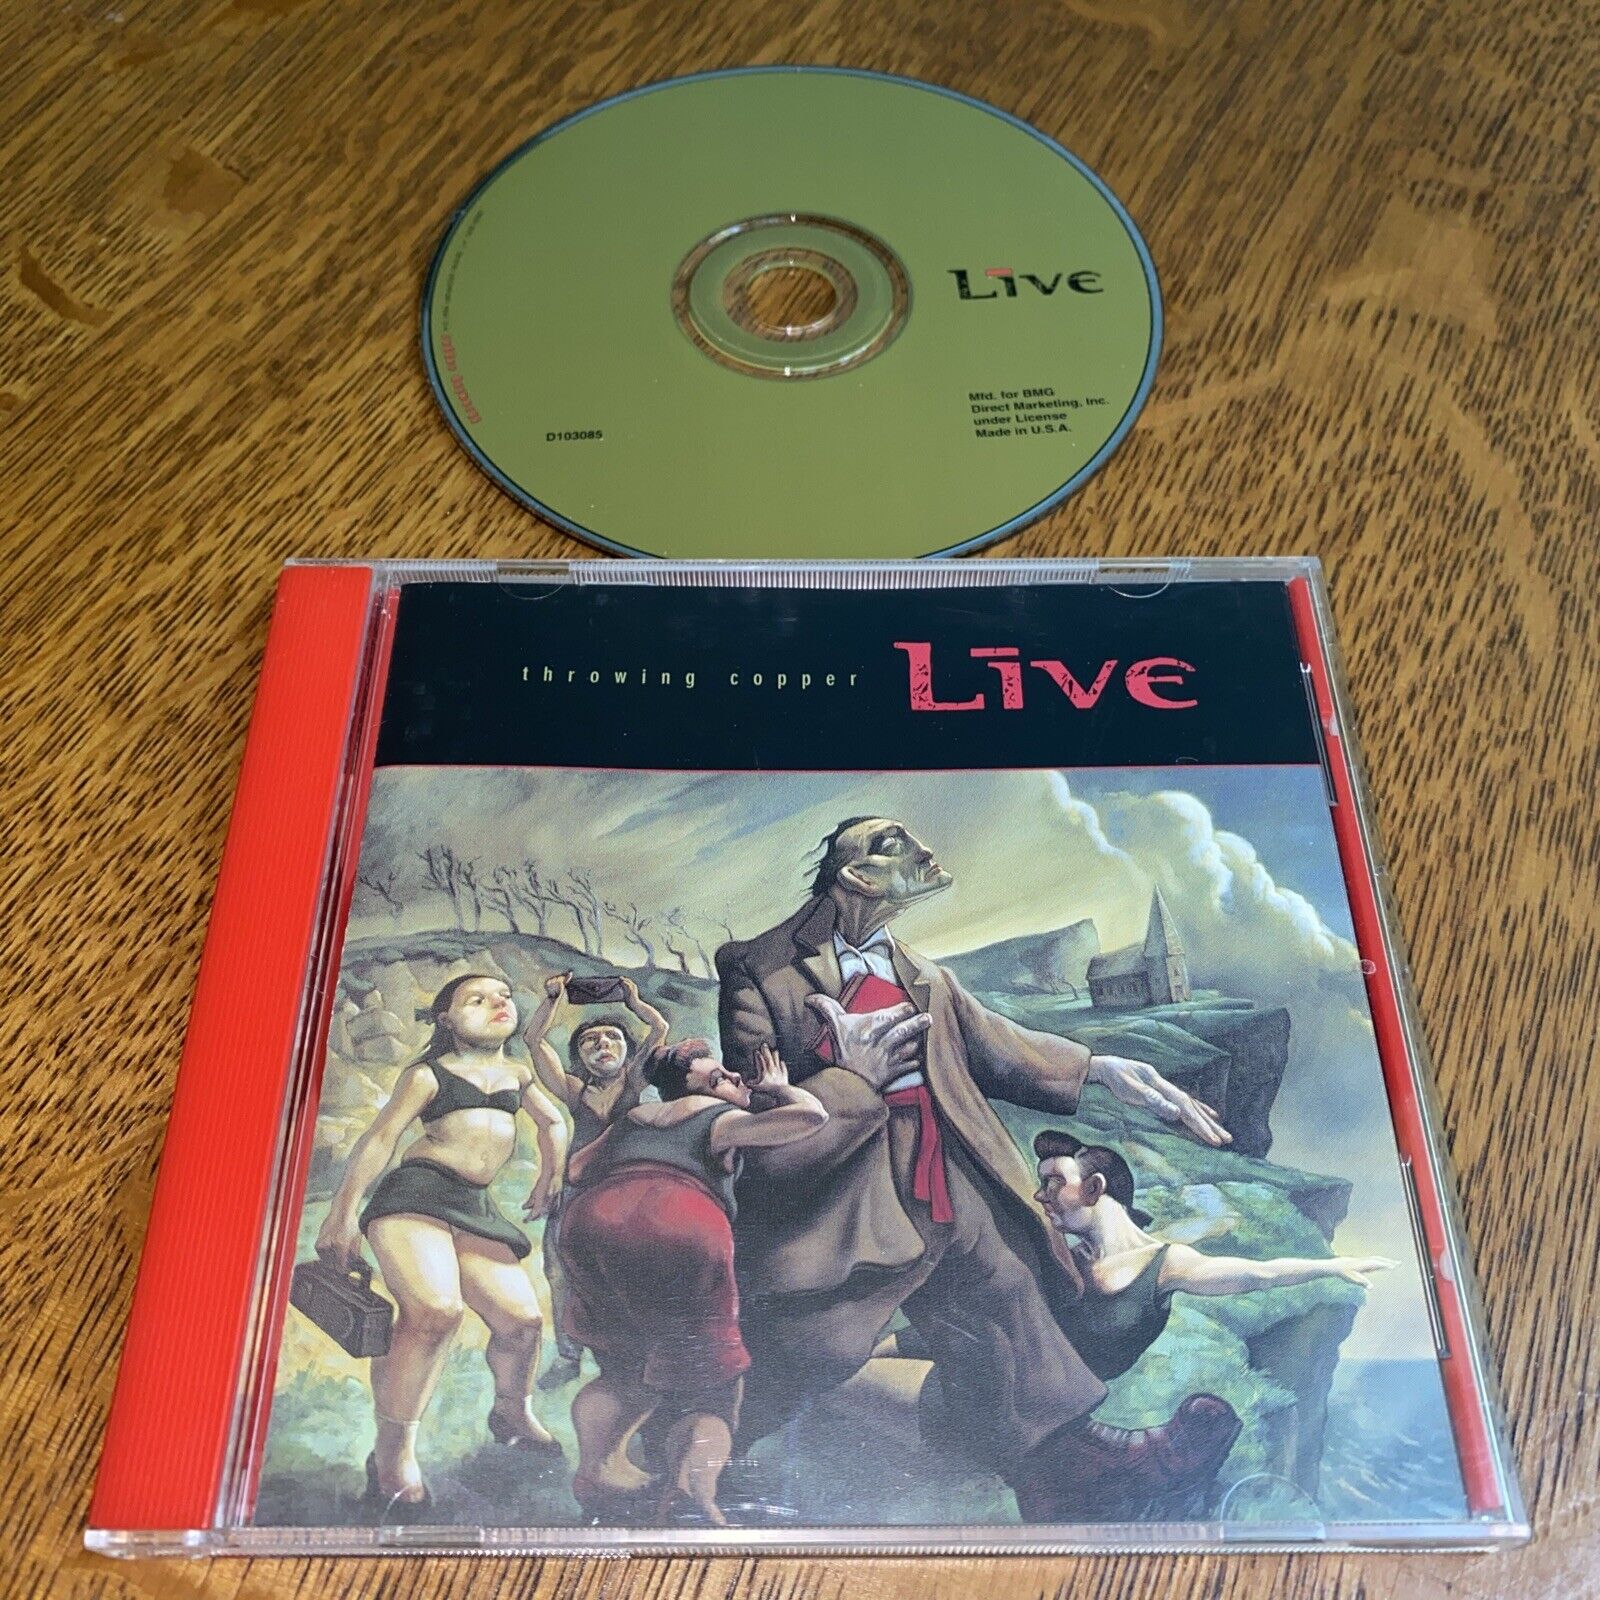 Vintage Throwing Copper by Live (CD, Apr-1994, Radioactive Records) Very Good